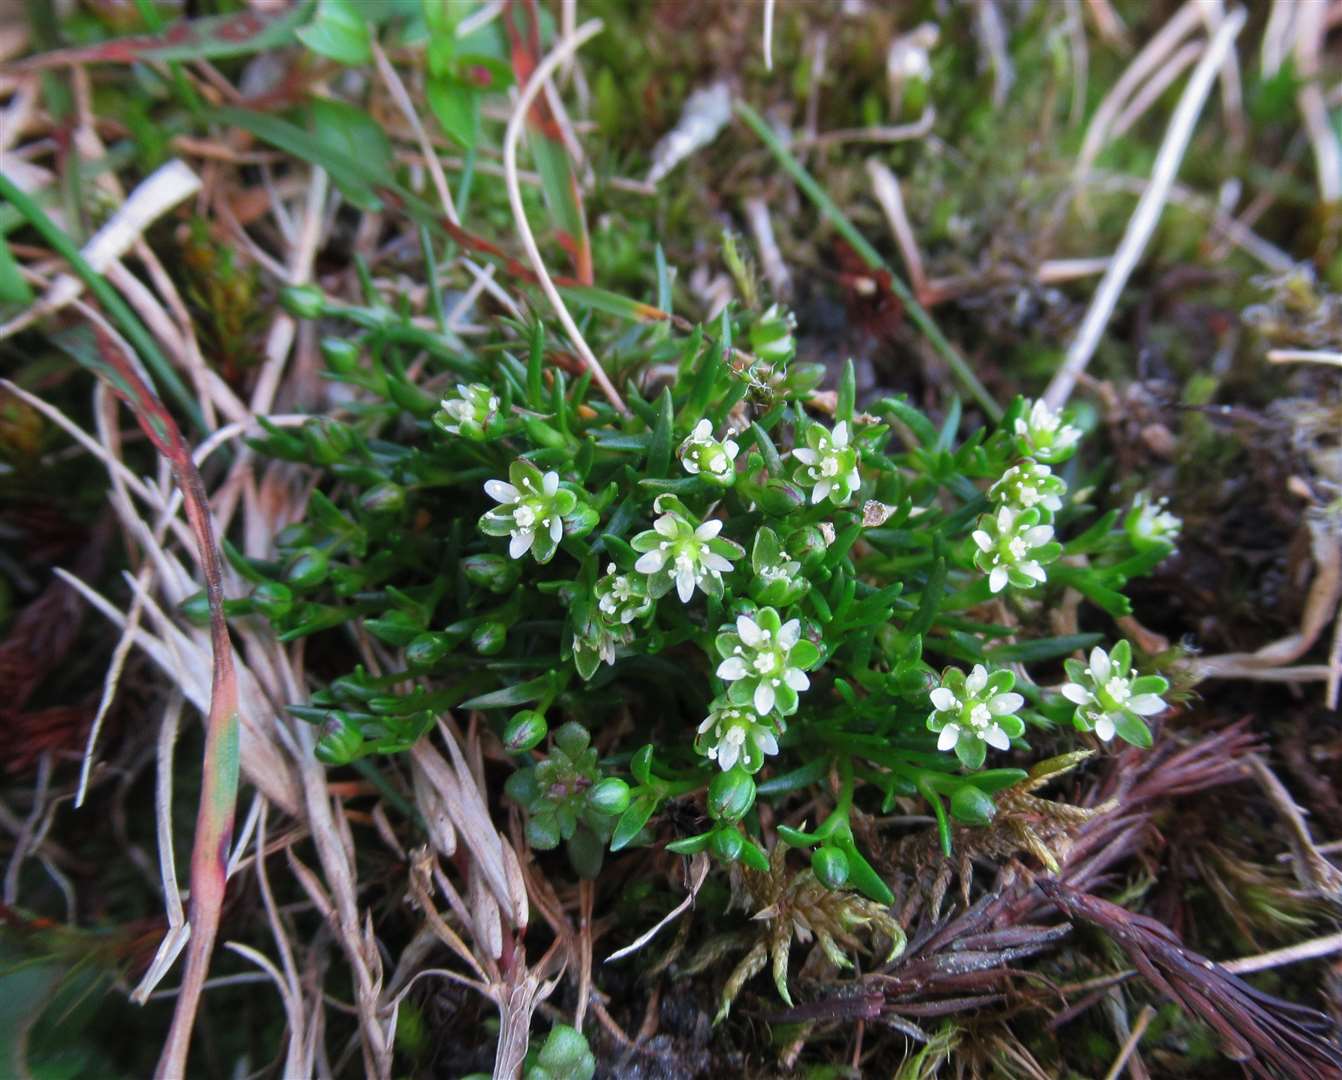 Snow pearlwort is among the mountain plants that could become extinct due to climate change (Sarah Watts/University of Stirling/PA)